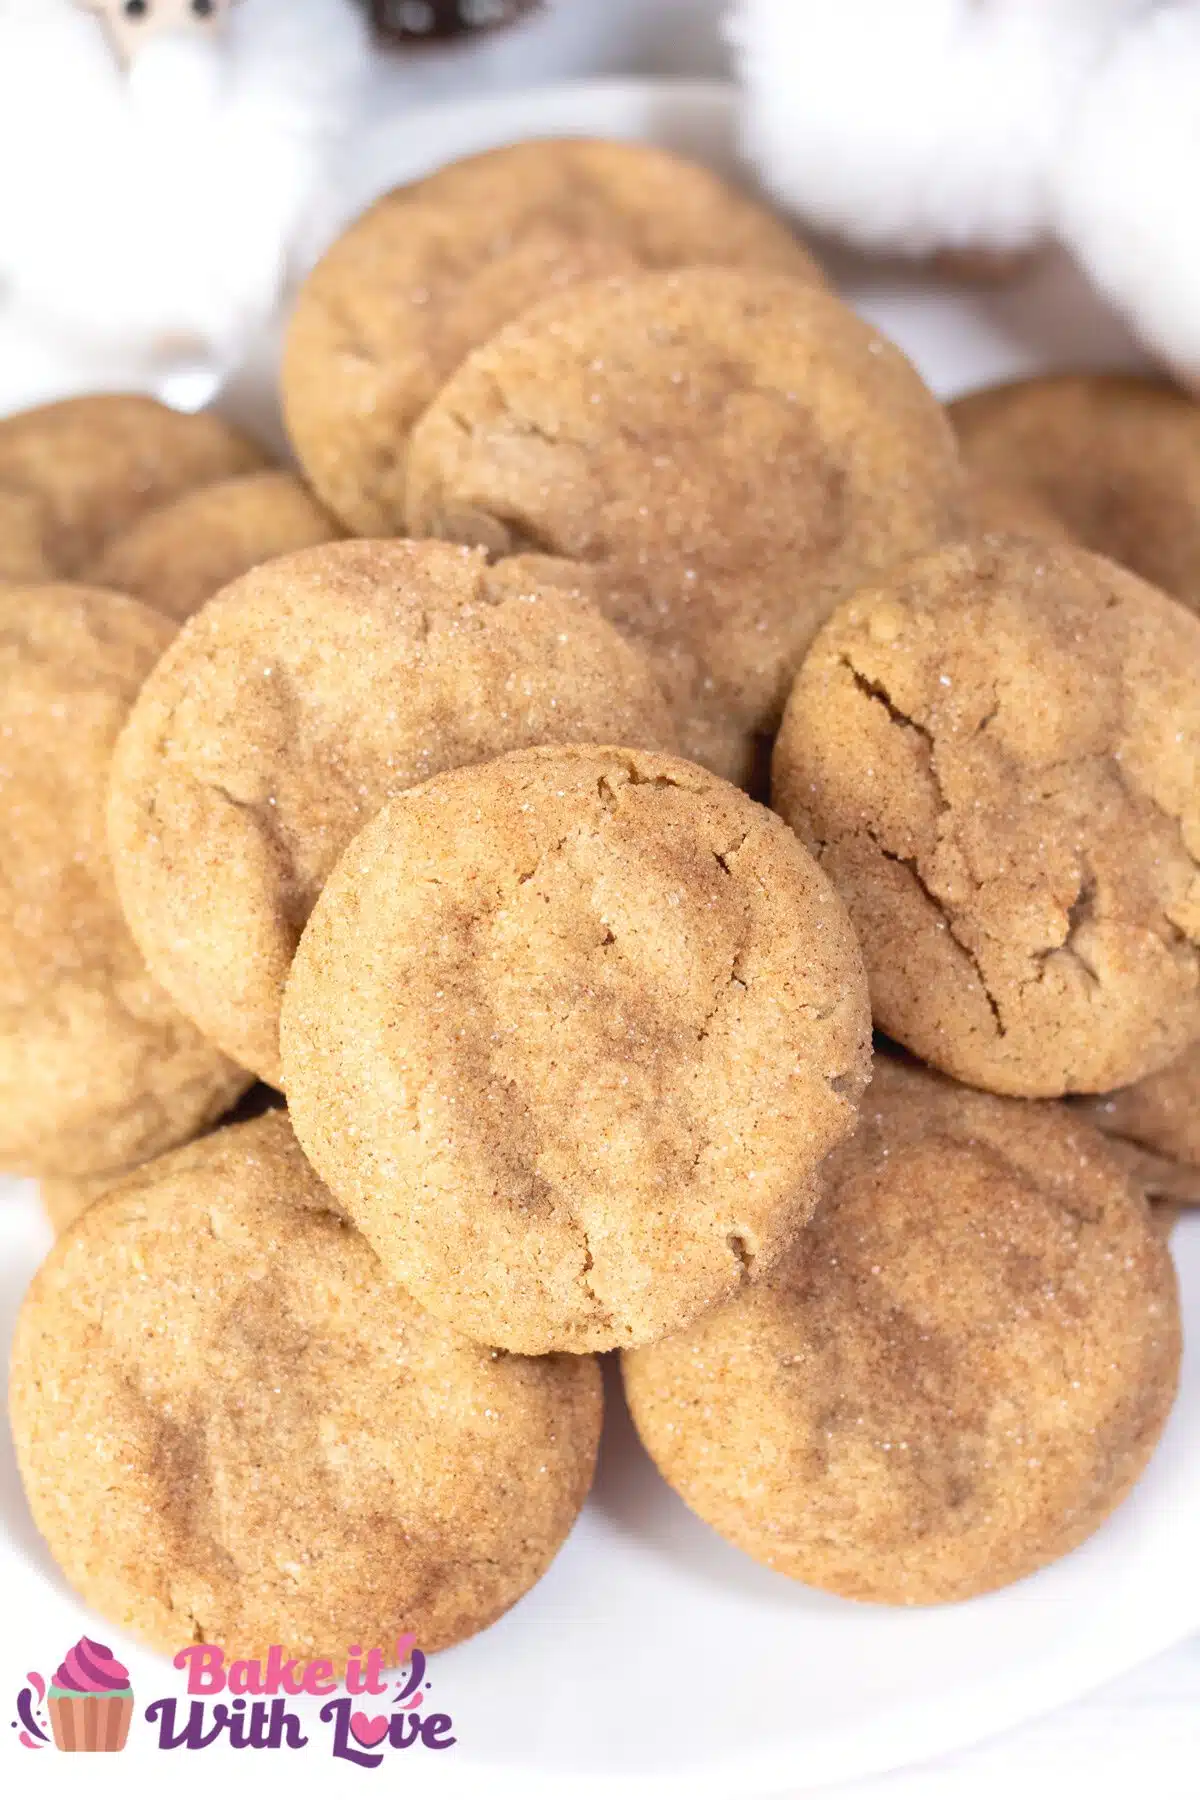 Tall image showing gingerdoodle cookies on a plate.